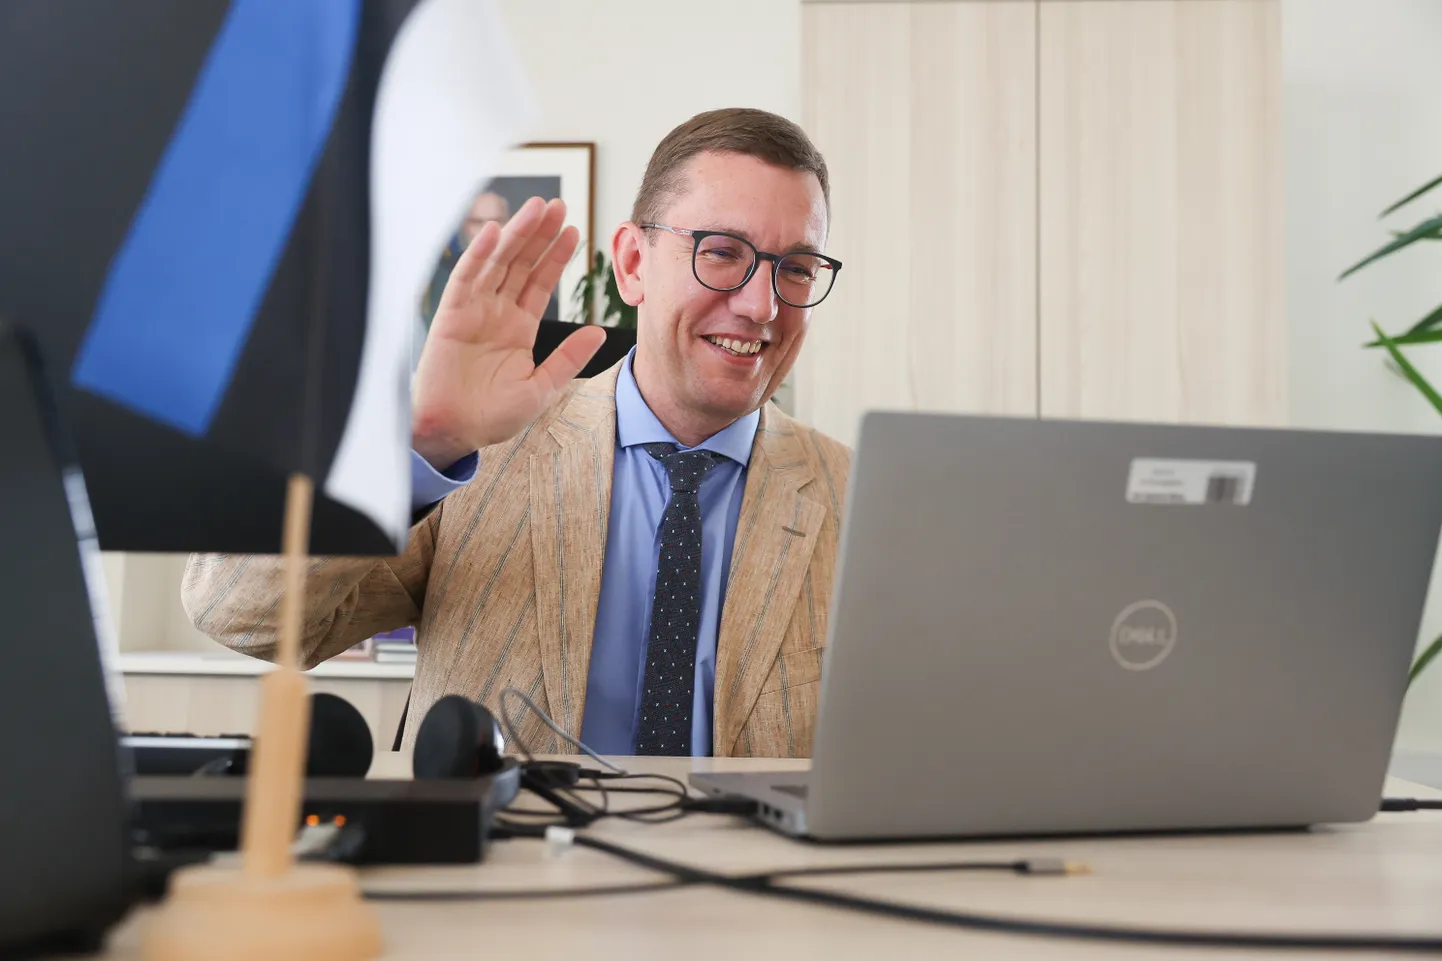 Kristen Michal waving in greeting to his party colleagues at the start of the Reform Party board meeting in his ministerial office on Friday morning.